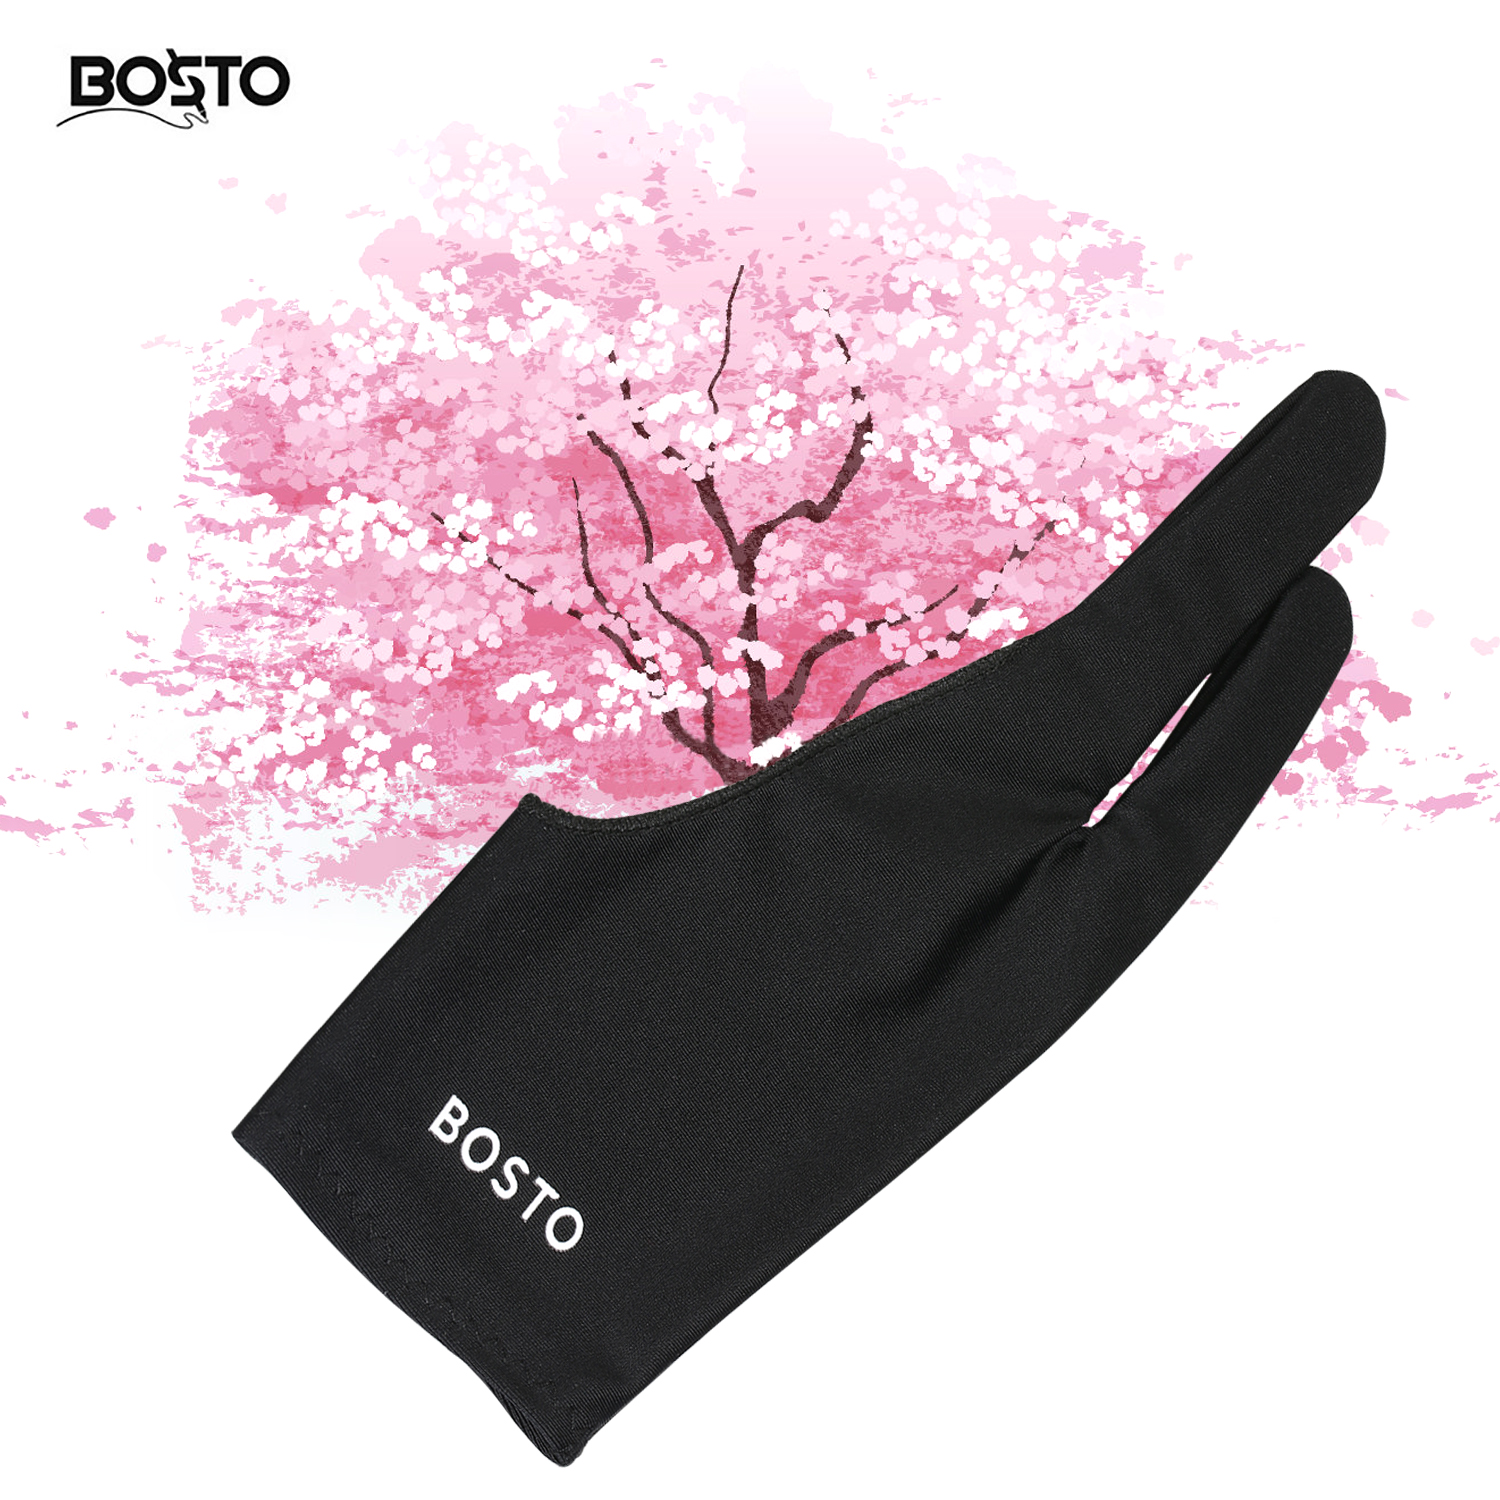 Bosto Two-Finger Free Size Drawing Glove Artist Tablet Drawing Glove for Right & Left Hand Compatible with BOSTO/UGEE/Huion/Wacom Graphics Drawing